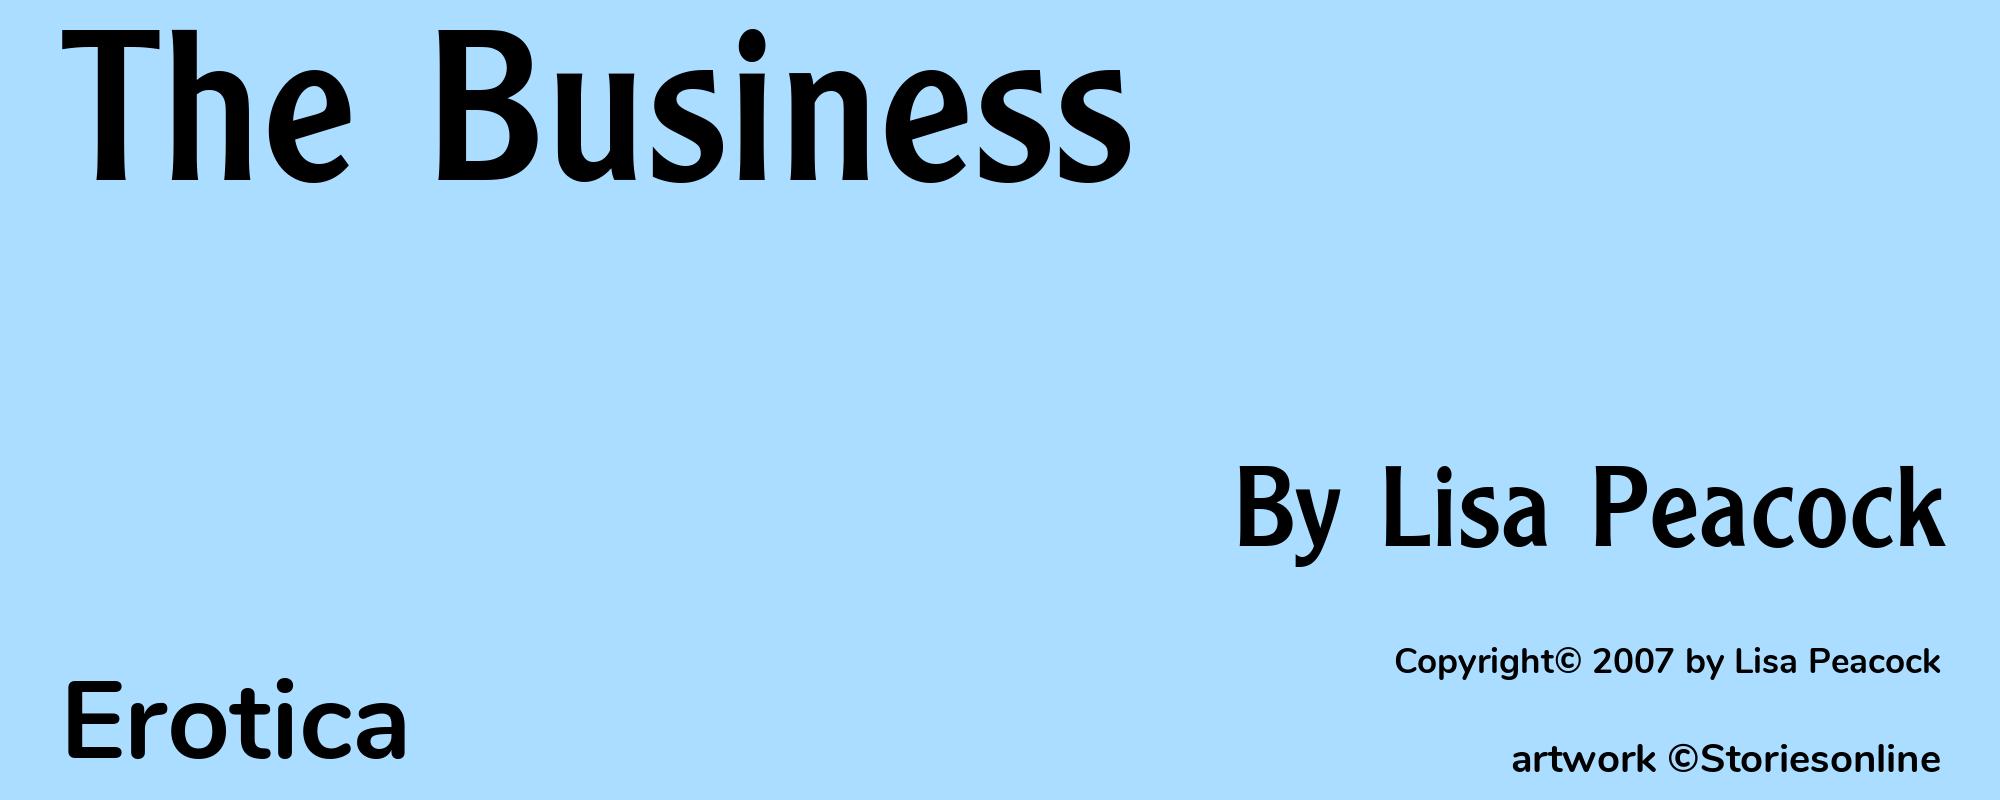 The Business - Cover